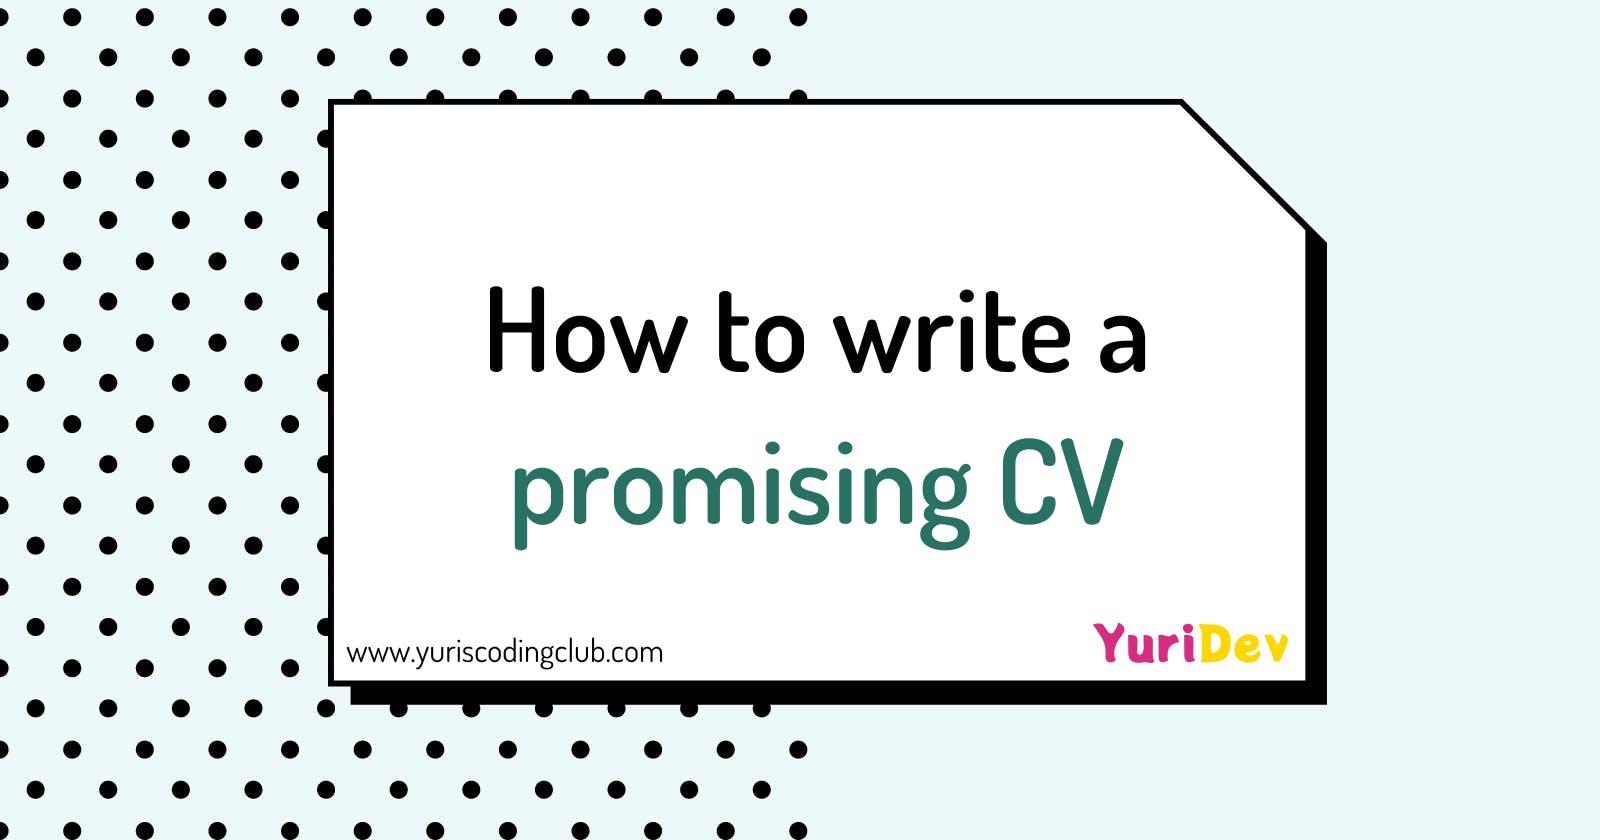 How to write a promising CV